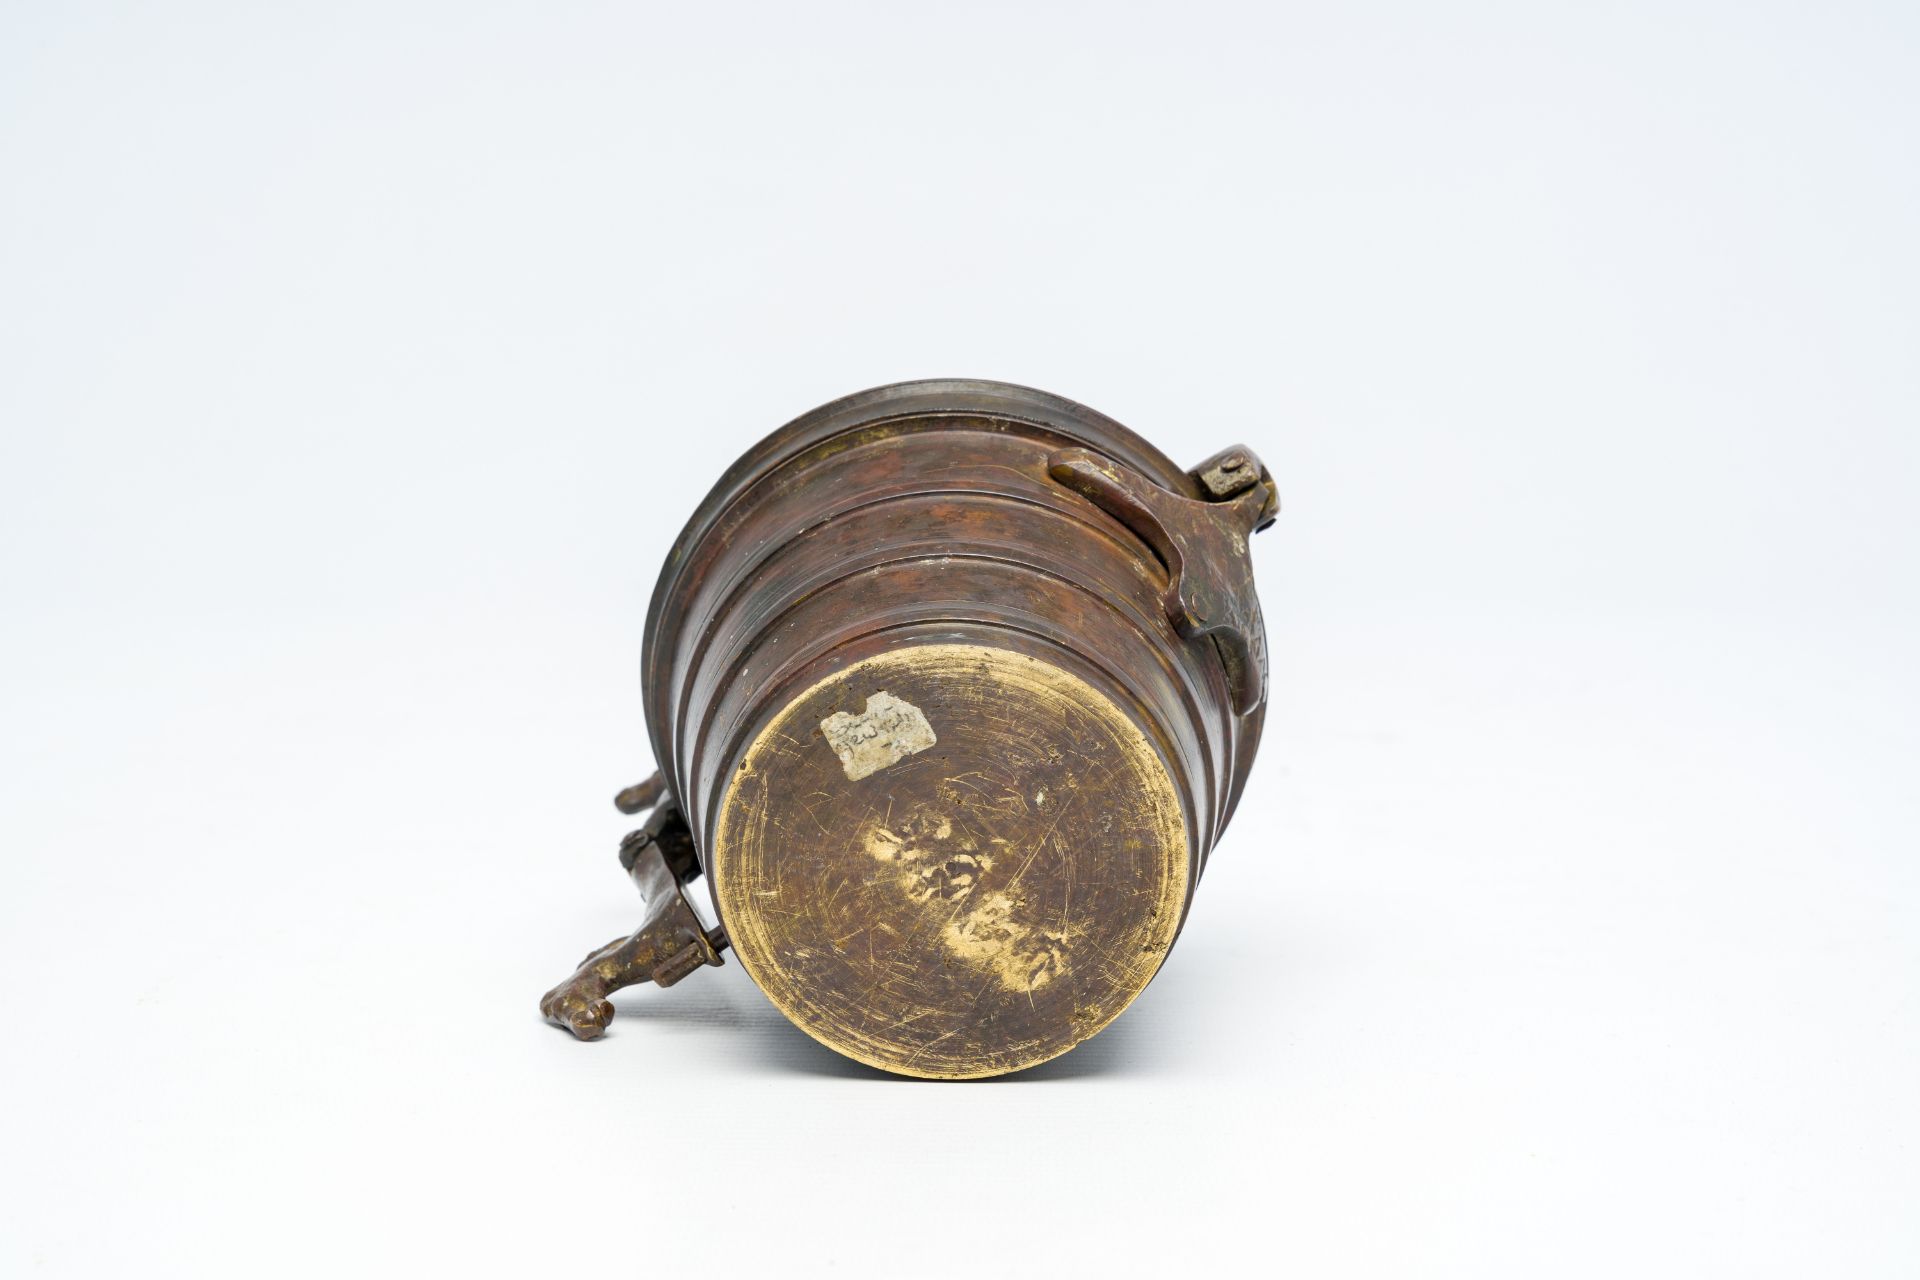 A set of bronze probably Portuguese colonial Nuremberg style nesting weights, ca. 1900 - Image 8 of 13